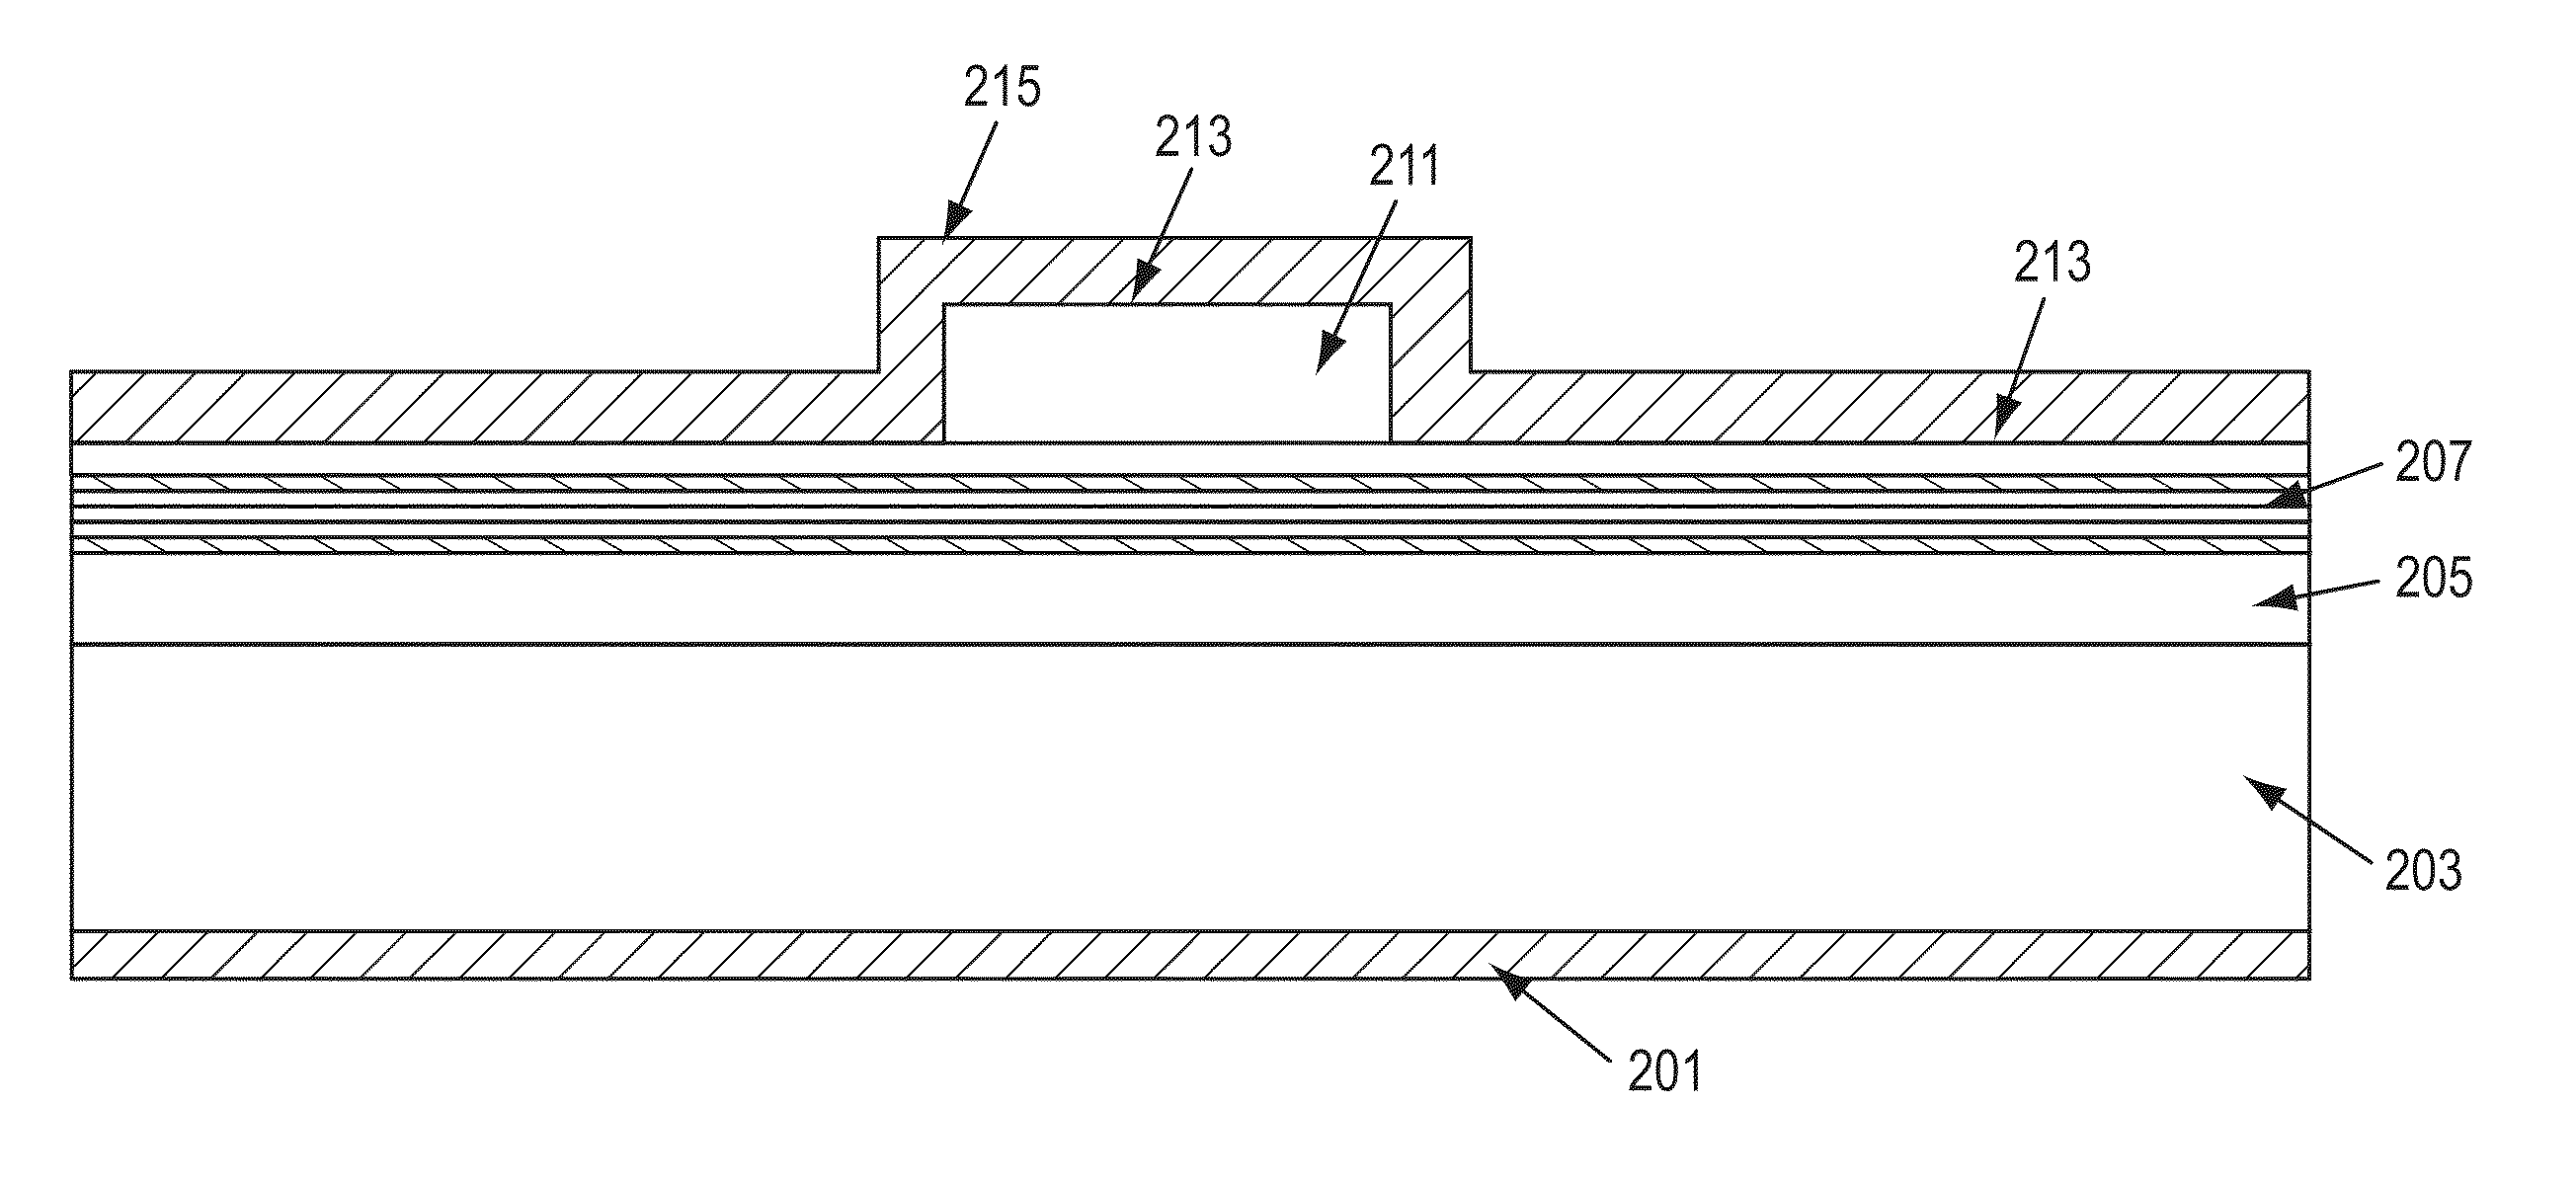 Optical Device Structure Using GaN Substrates and Growth Structures for Laser Applications